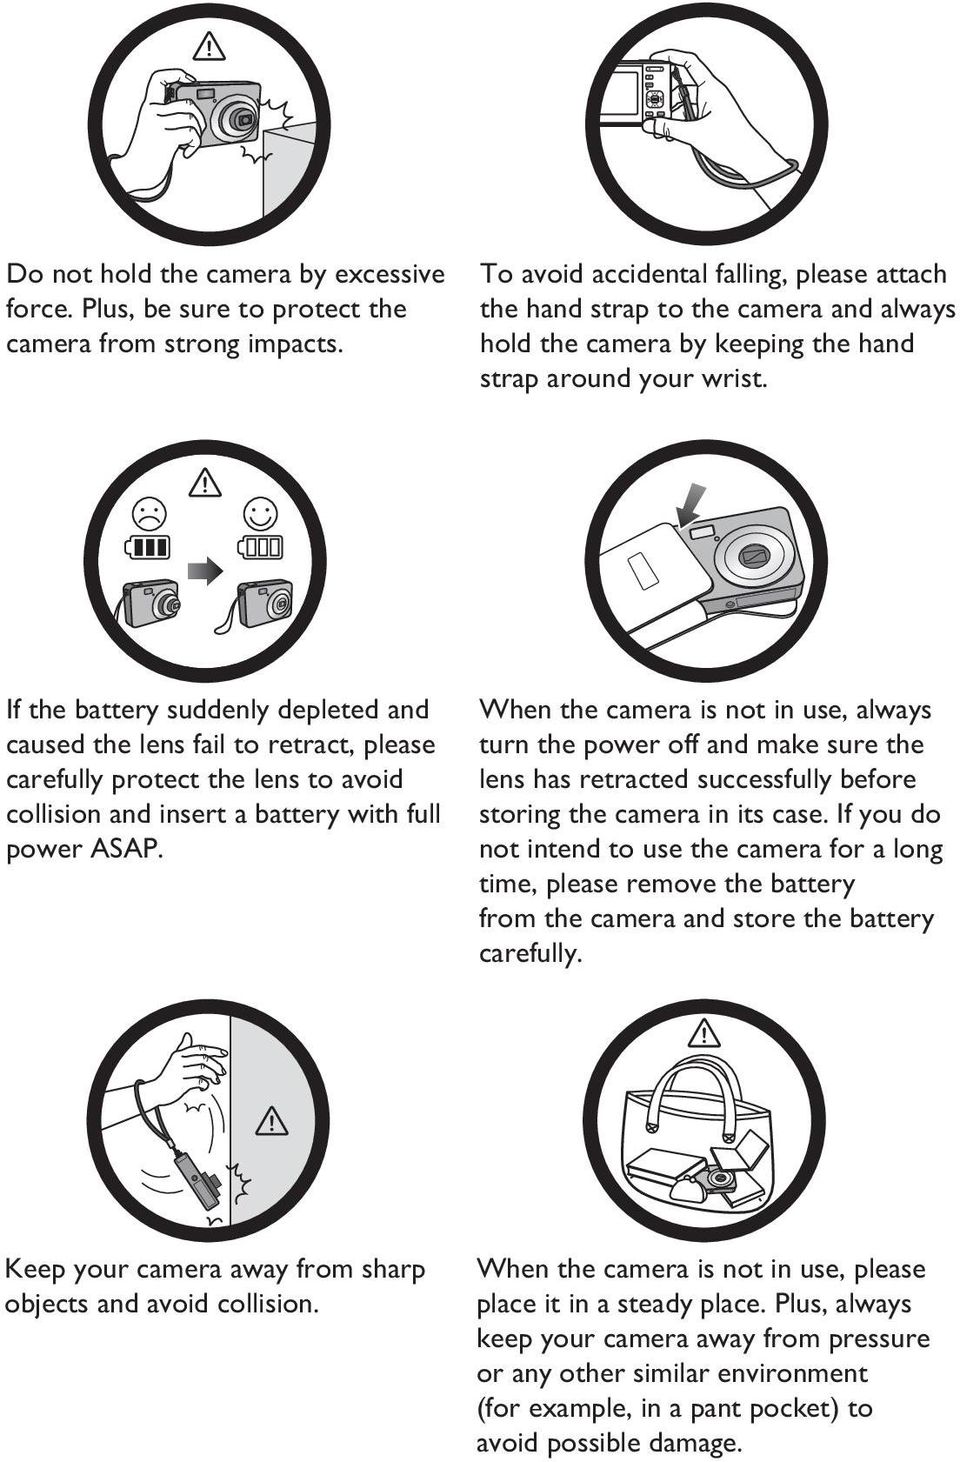 If the battery suddenly depleted and caused the lens fail to retract, please carefully protect the lens to avoid collision and insert a battery with full power ASAP.